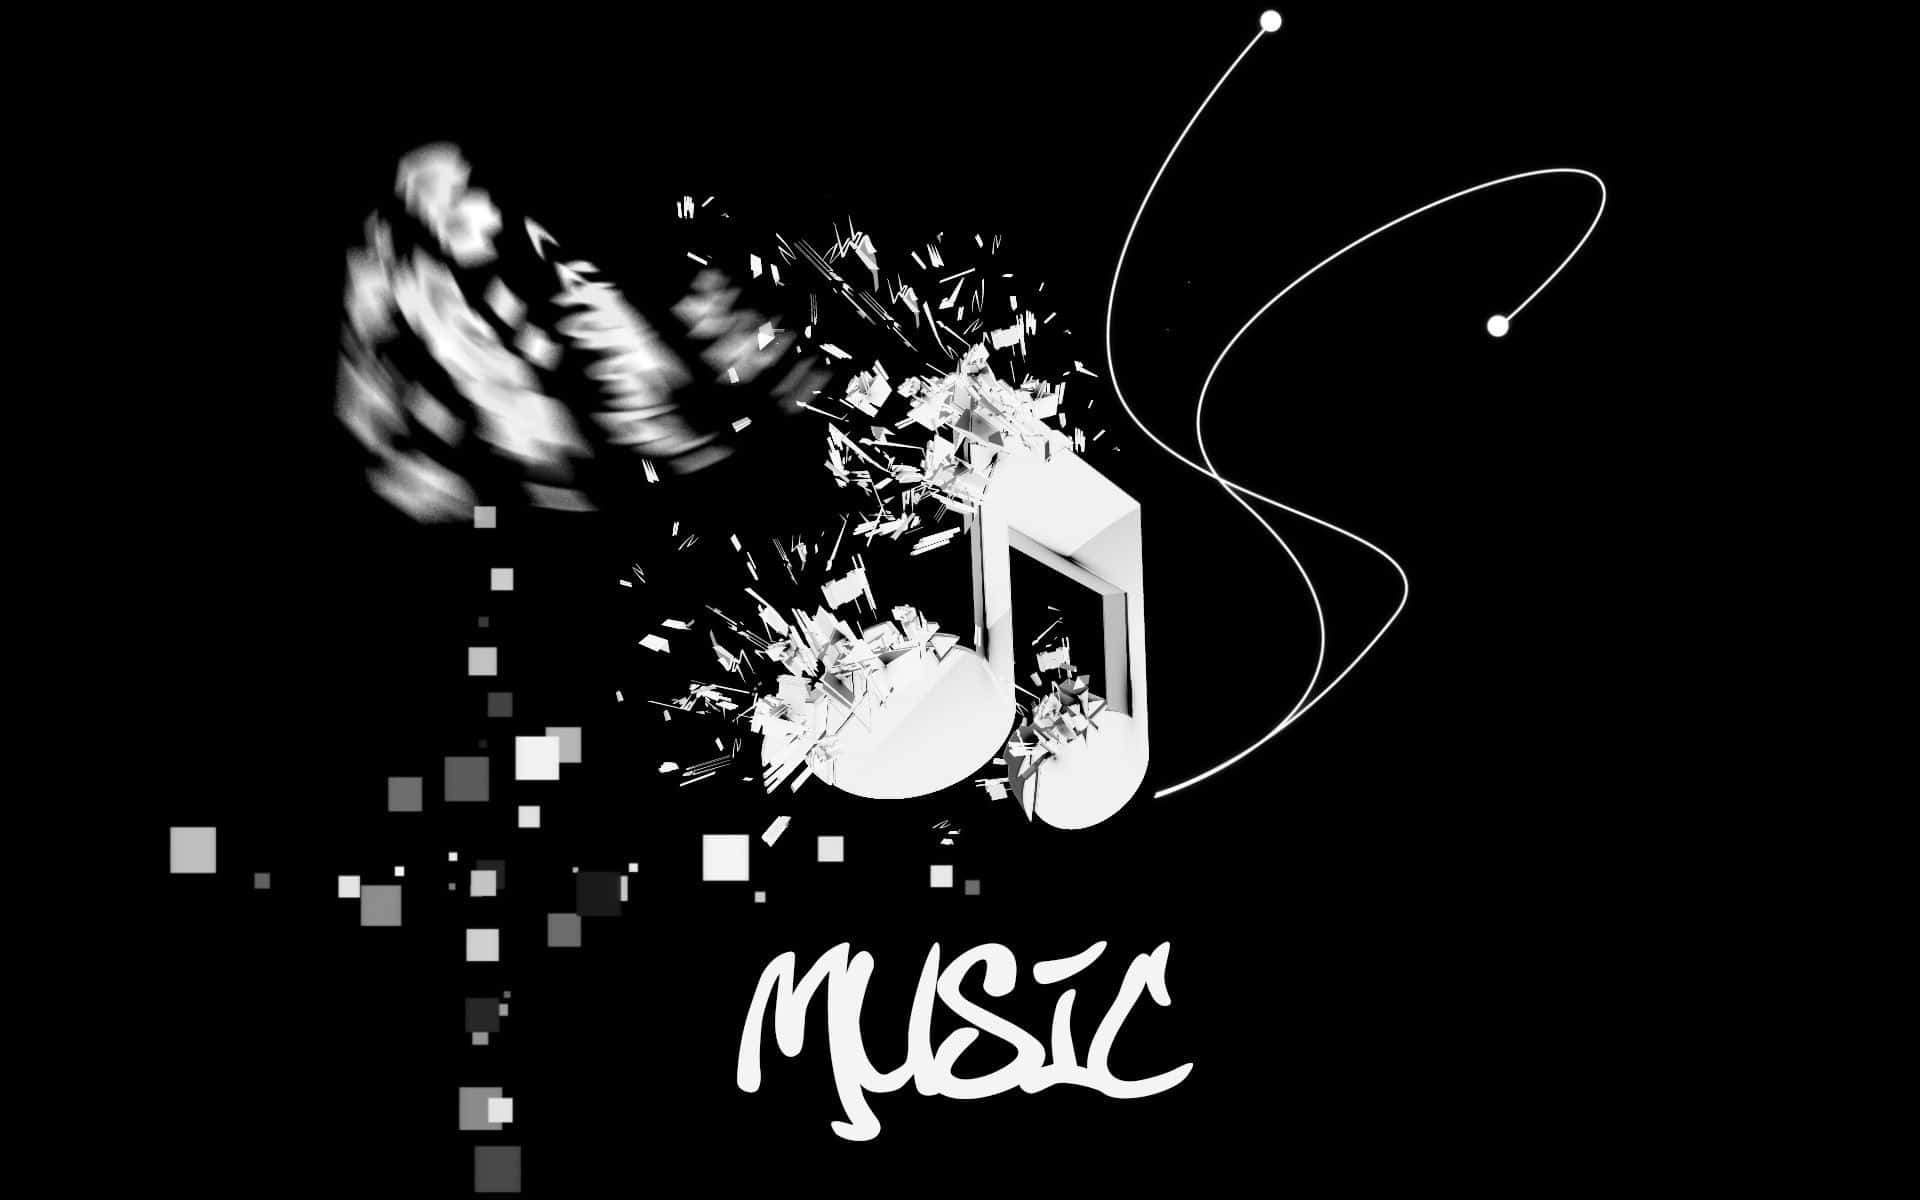 A black and white piano keyboard with musical notes swirling around it. Wallpaper